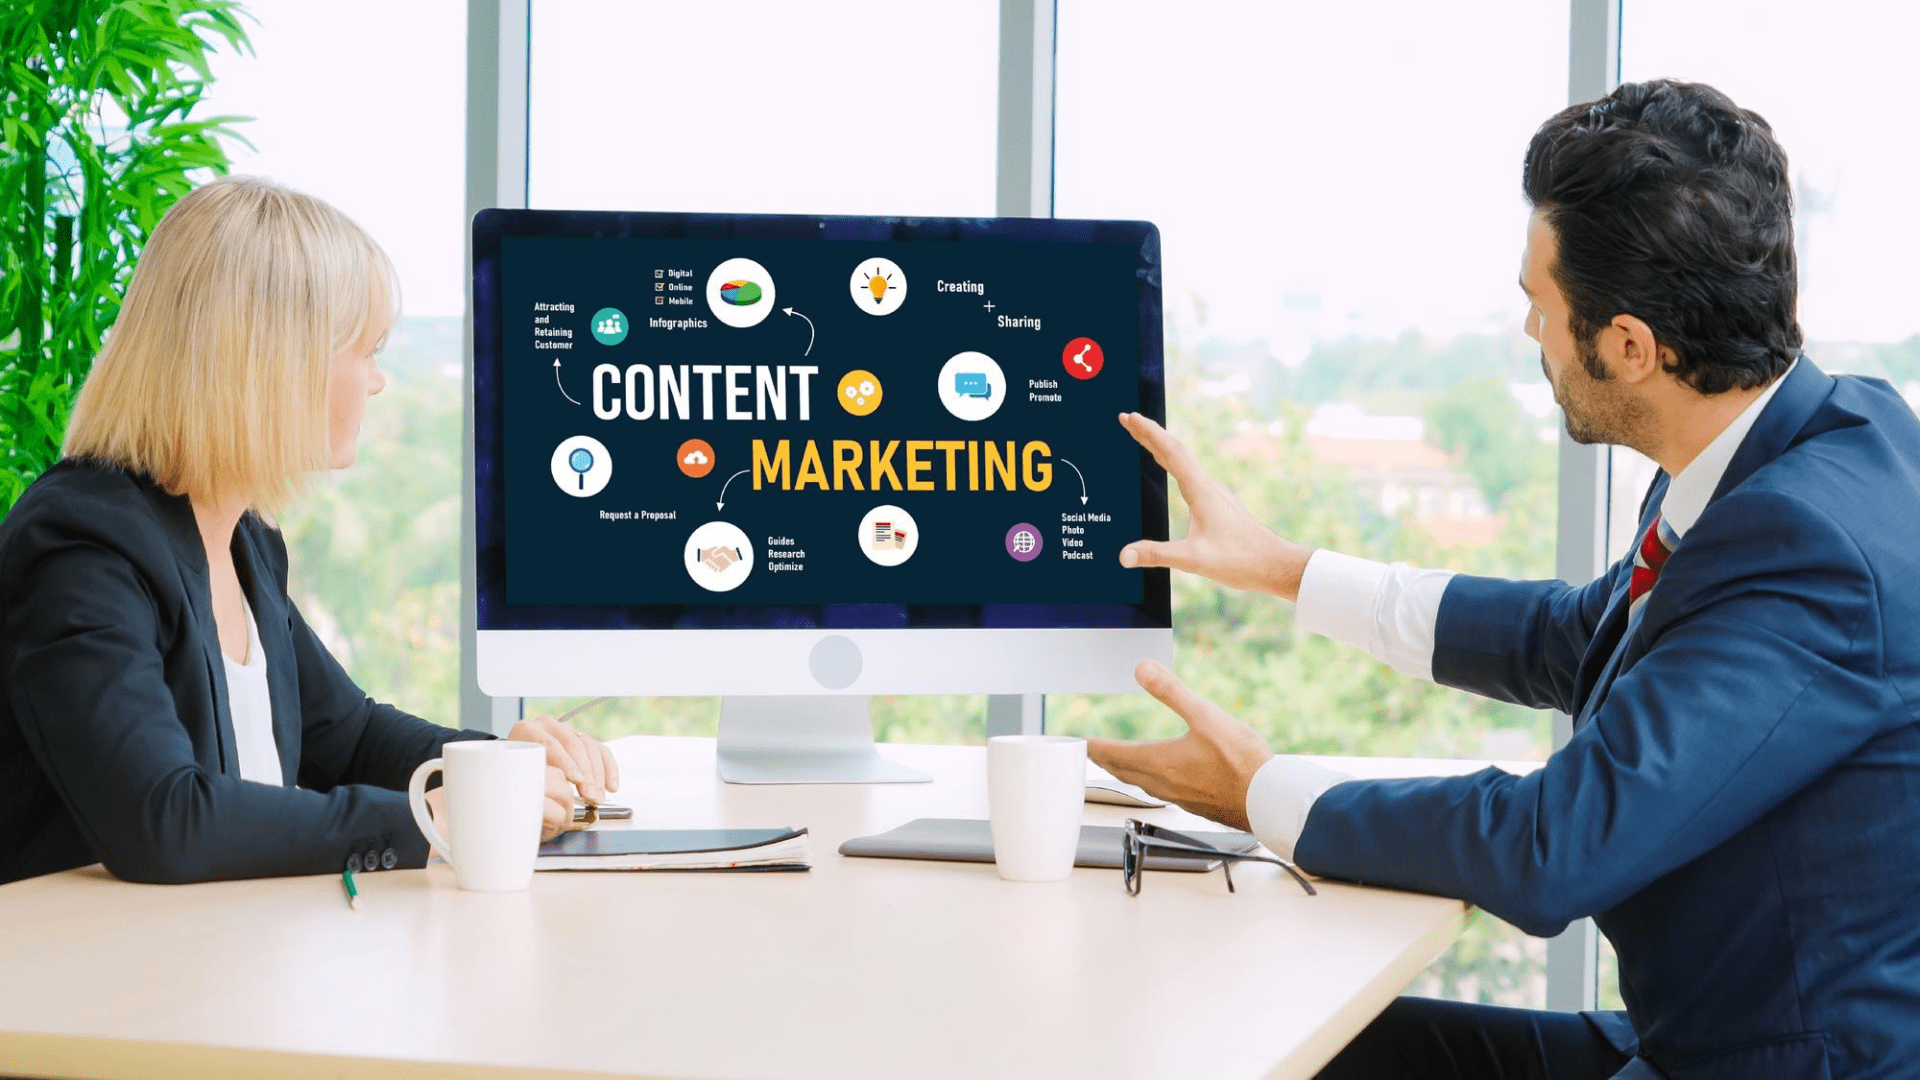 Content Marketing Strategies: Creating Valuable and Engaging Content for Your Target Market